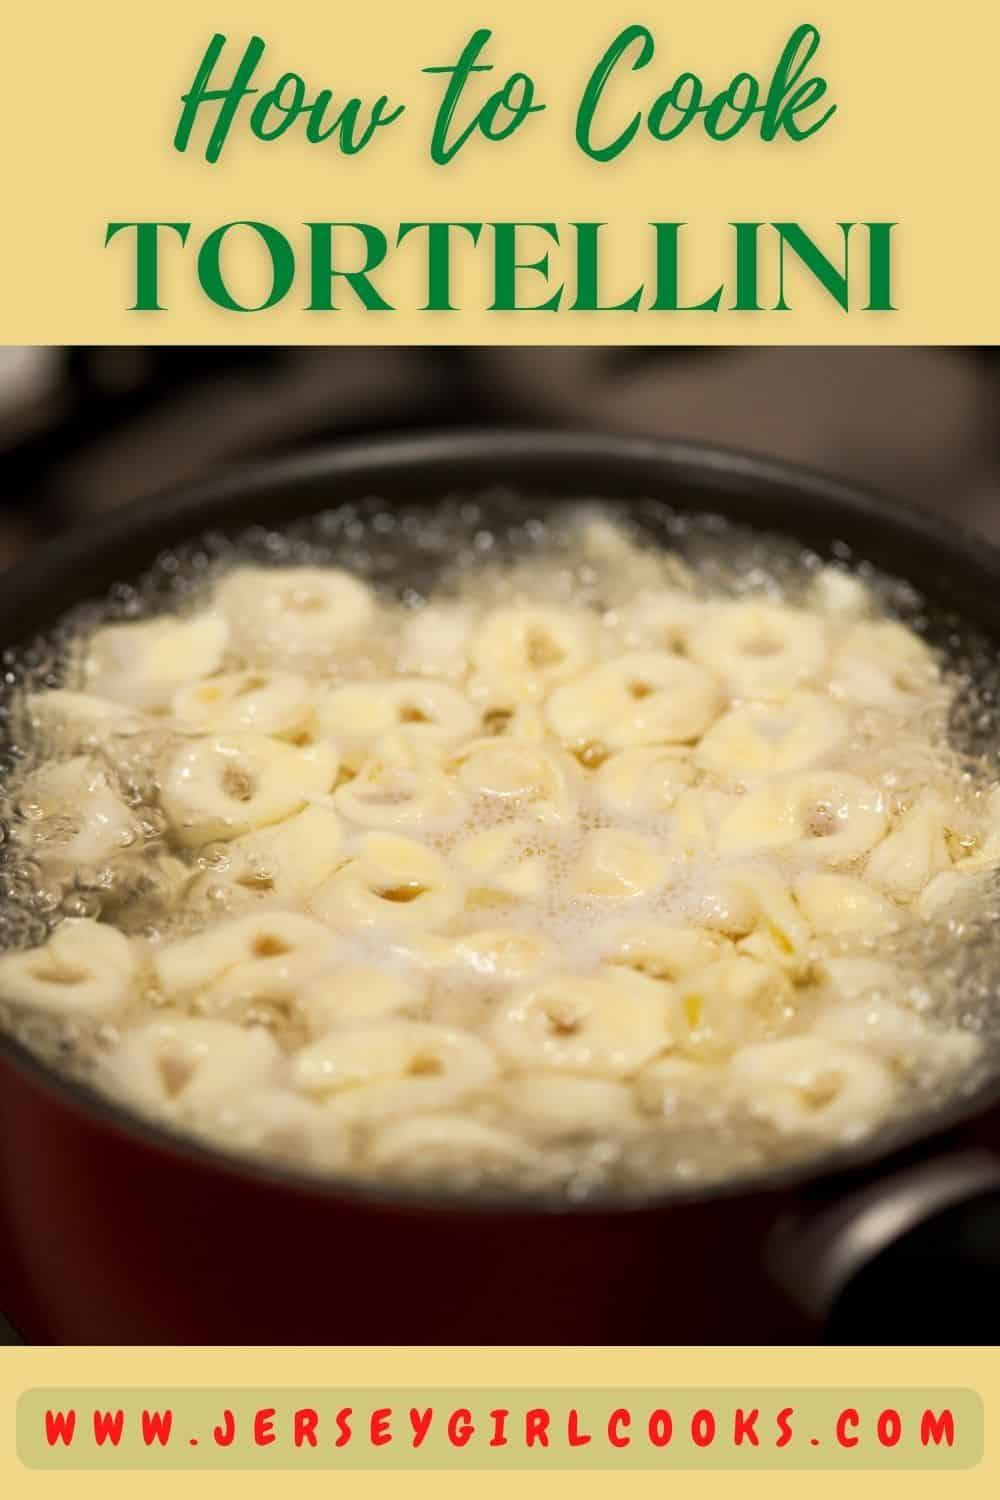 How to cook tortellini pin image.